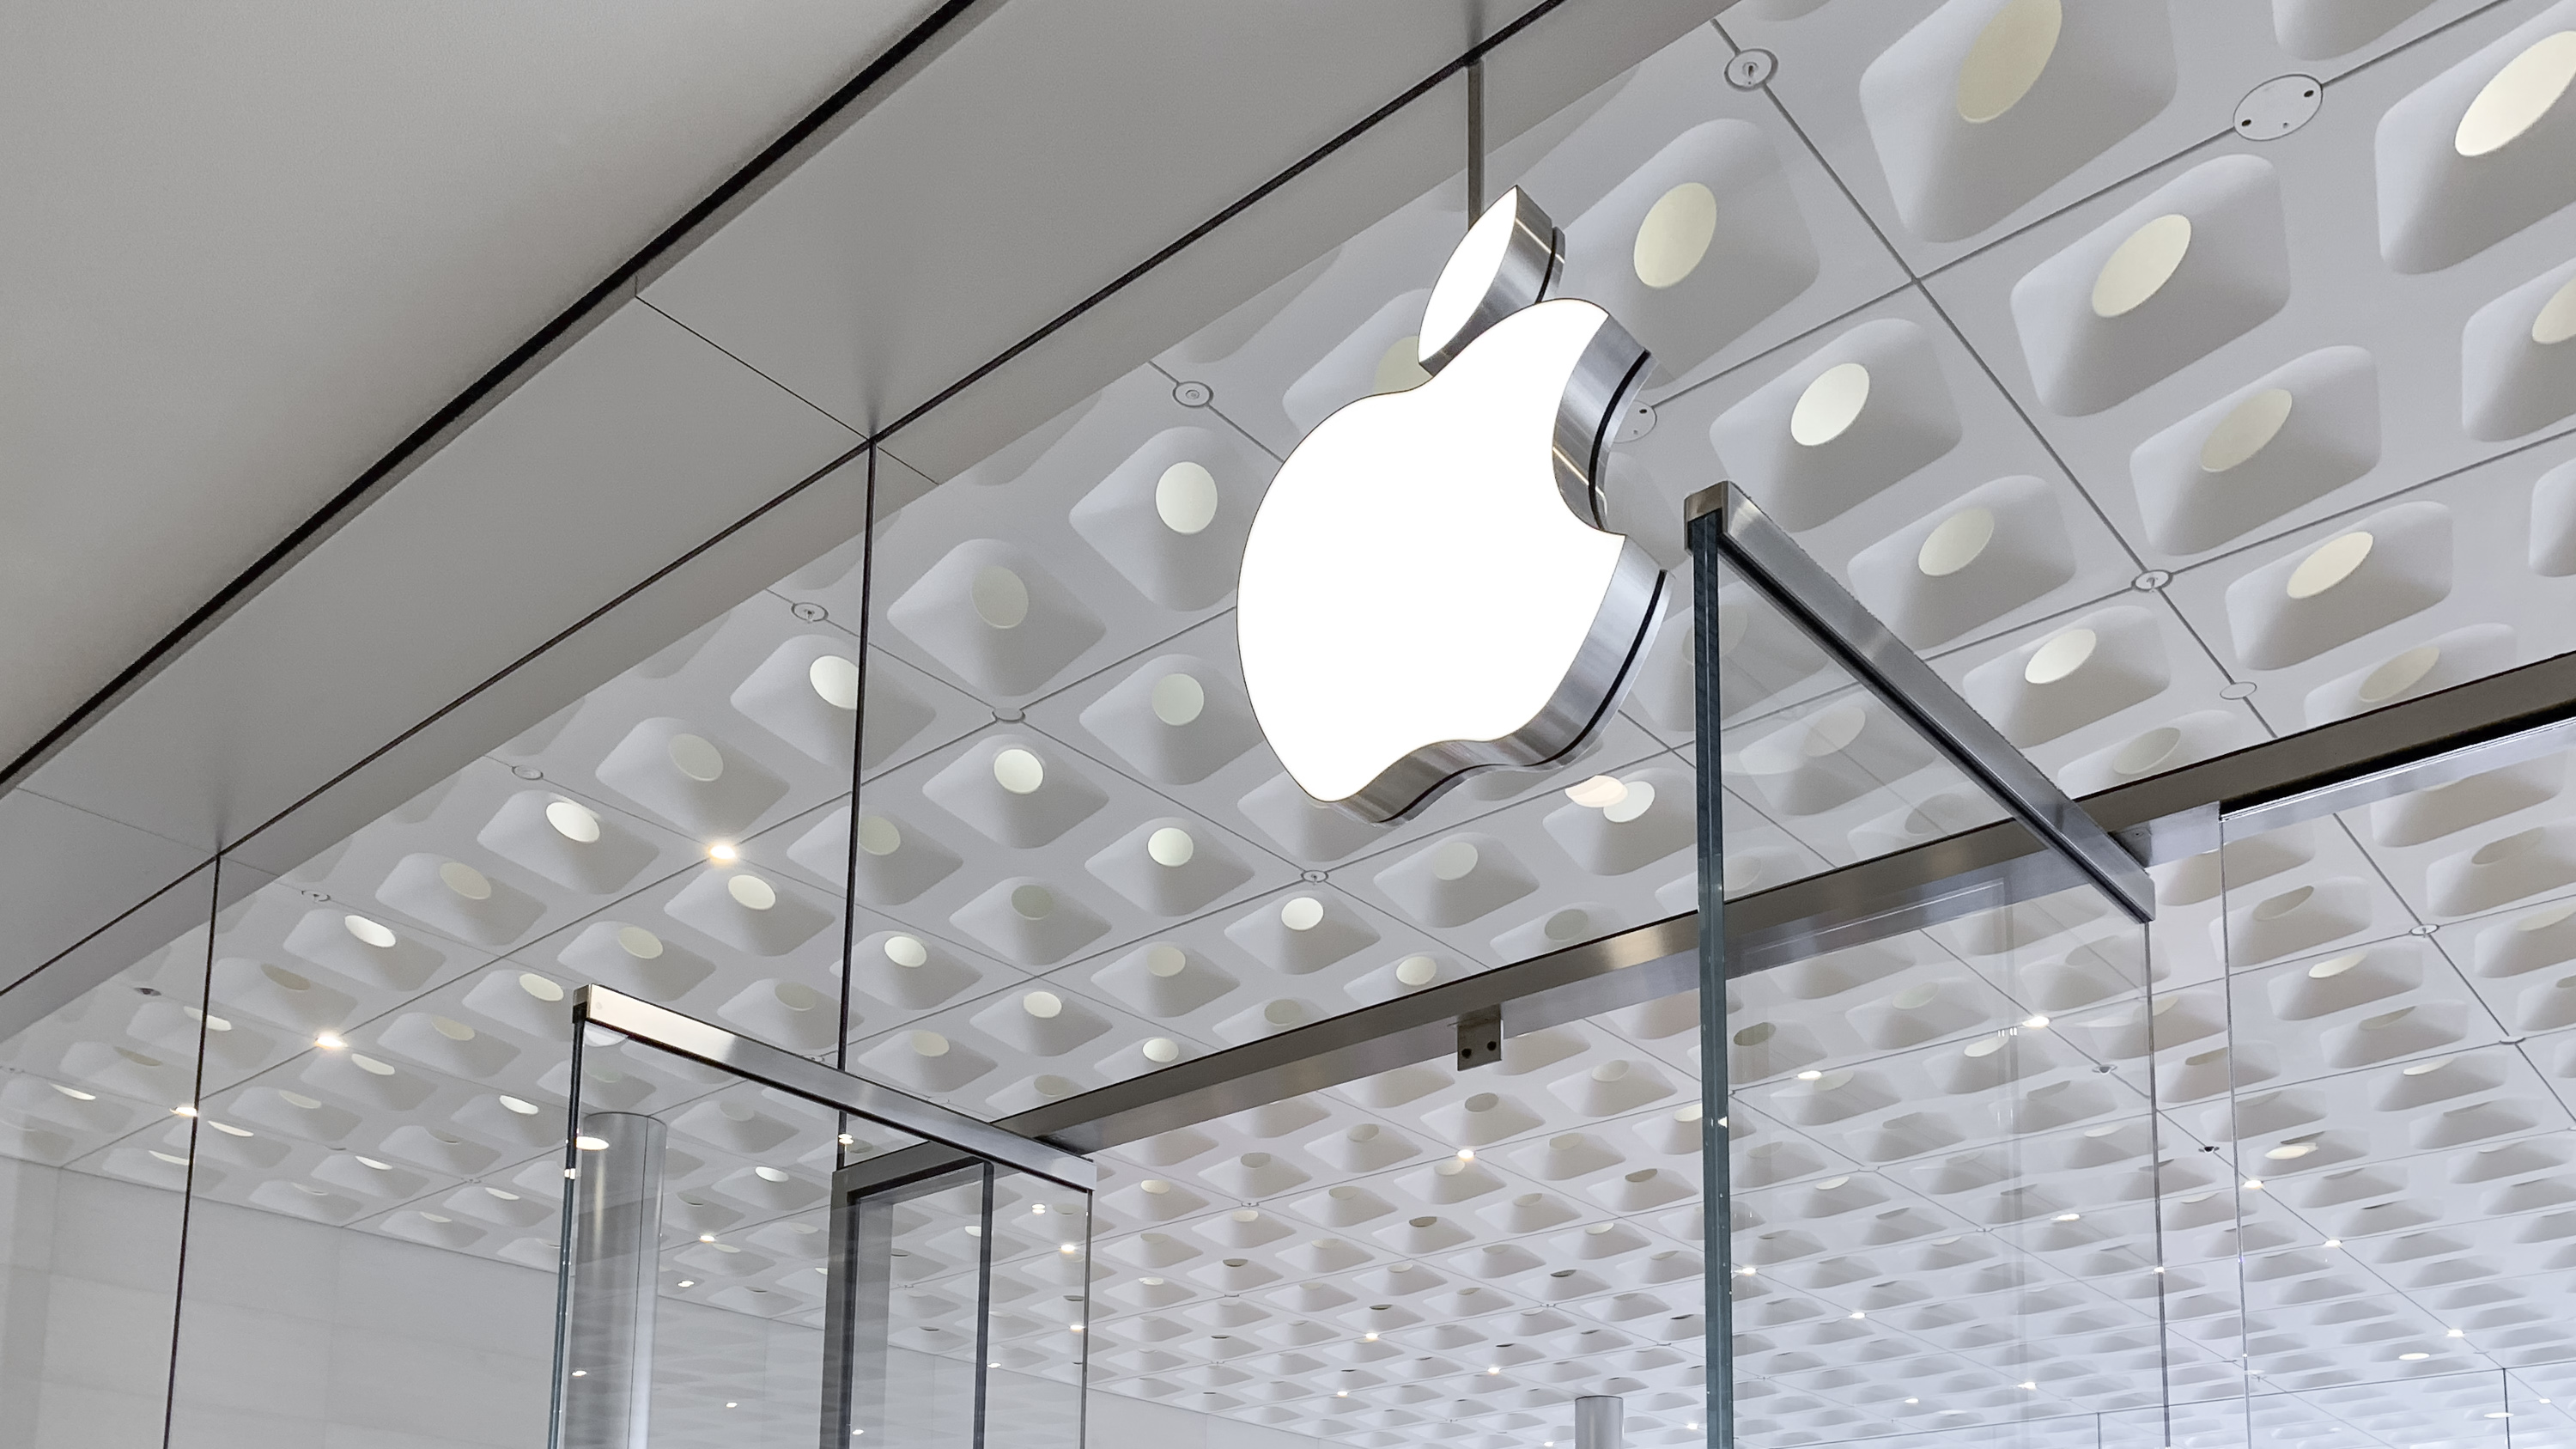 Apple will reopen over 100 US retail stores this week, most with